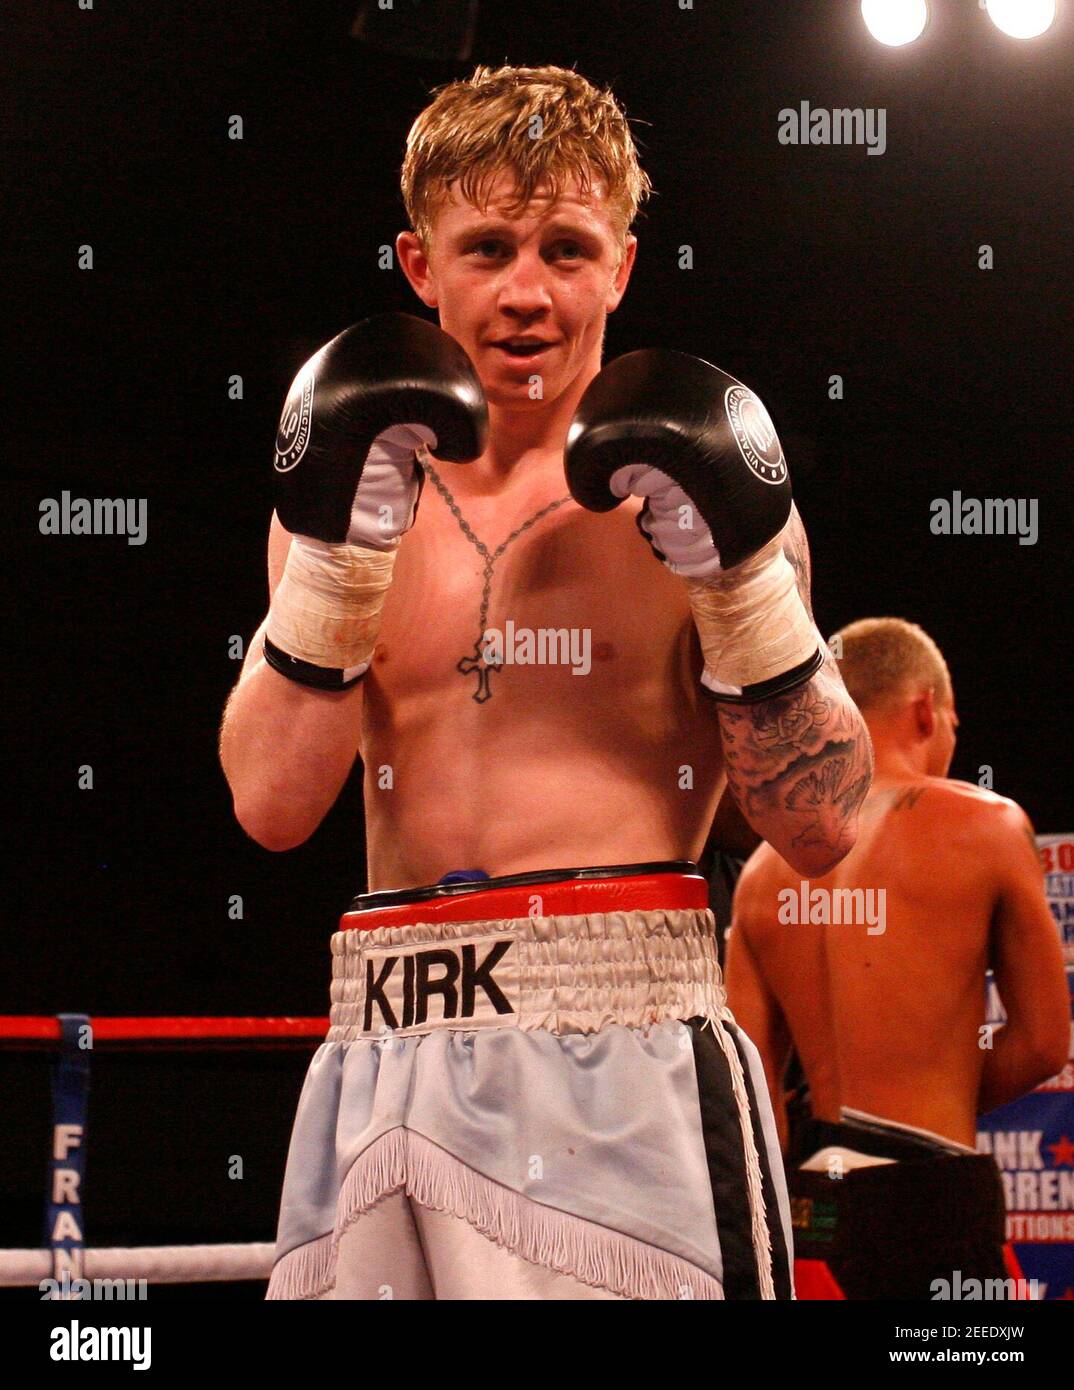 Boxing - Kirk Goodings v Robin Deakin - Lightweight - Bowlers Exhibition Centre, Manchester - 28/10/11  Kirk Goodings celebrates victory  Mandatory Credit: Action Images / Paul Thomas Stock Photo